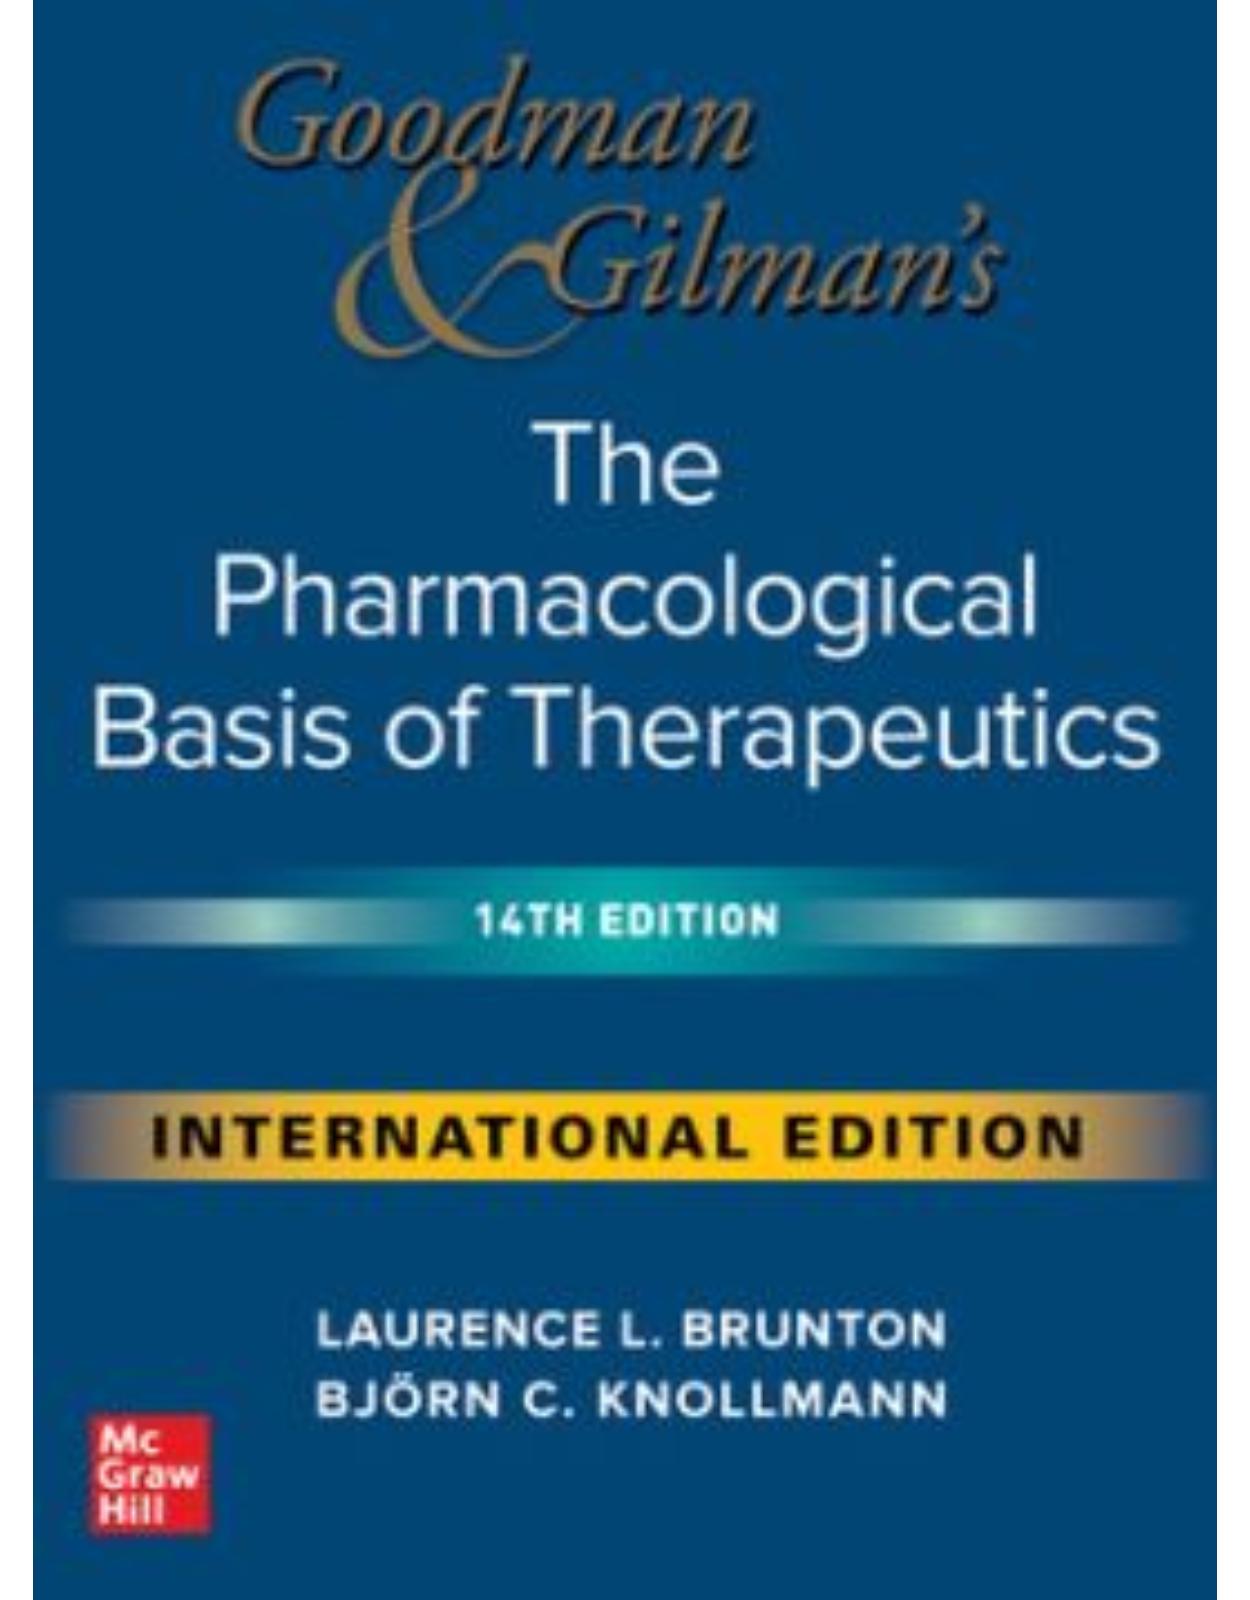 Goodman and Gilman’s The Pharmacological Basis of Therapeutics, 14th Edition